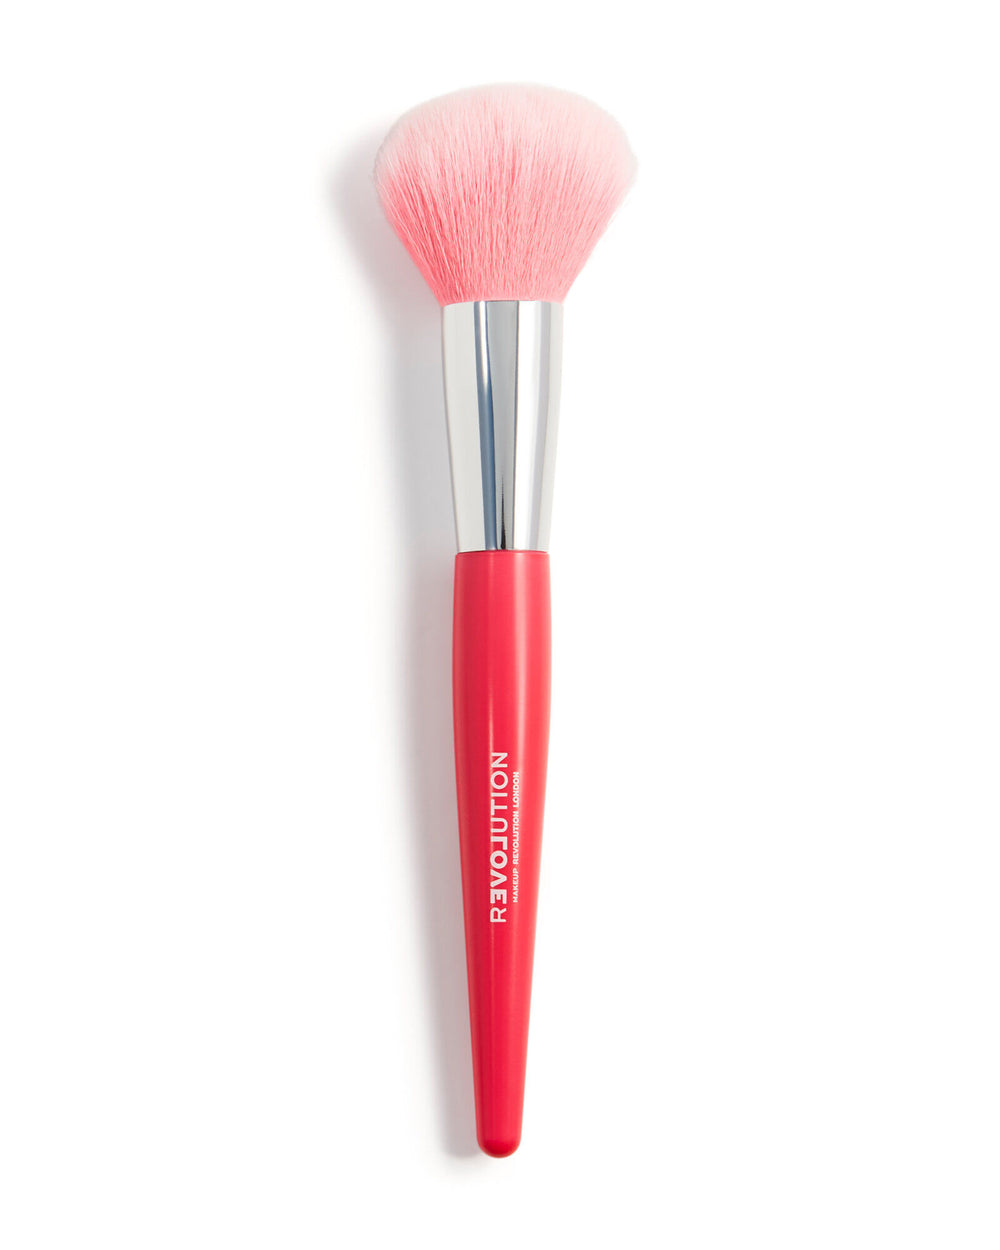 Revolution Relove Brush Queen Large Powder Brush 4pc Set + 1 Full Size Product Worth 25% Value Free